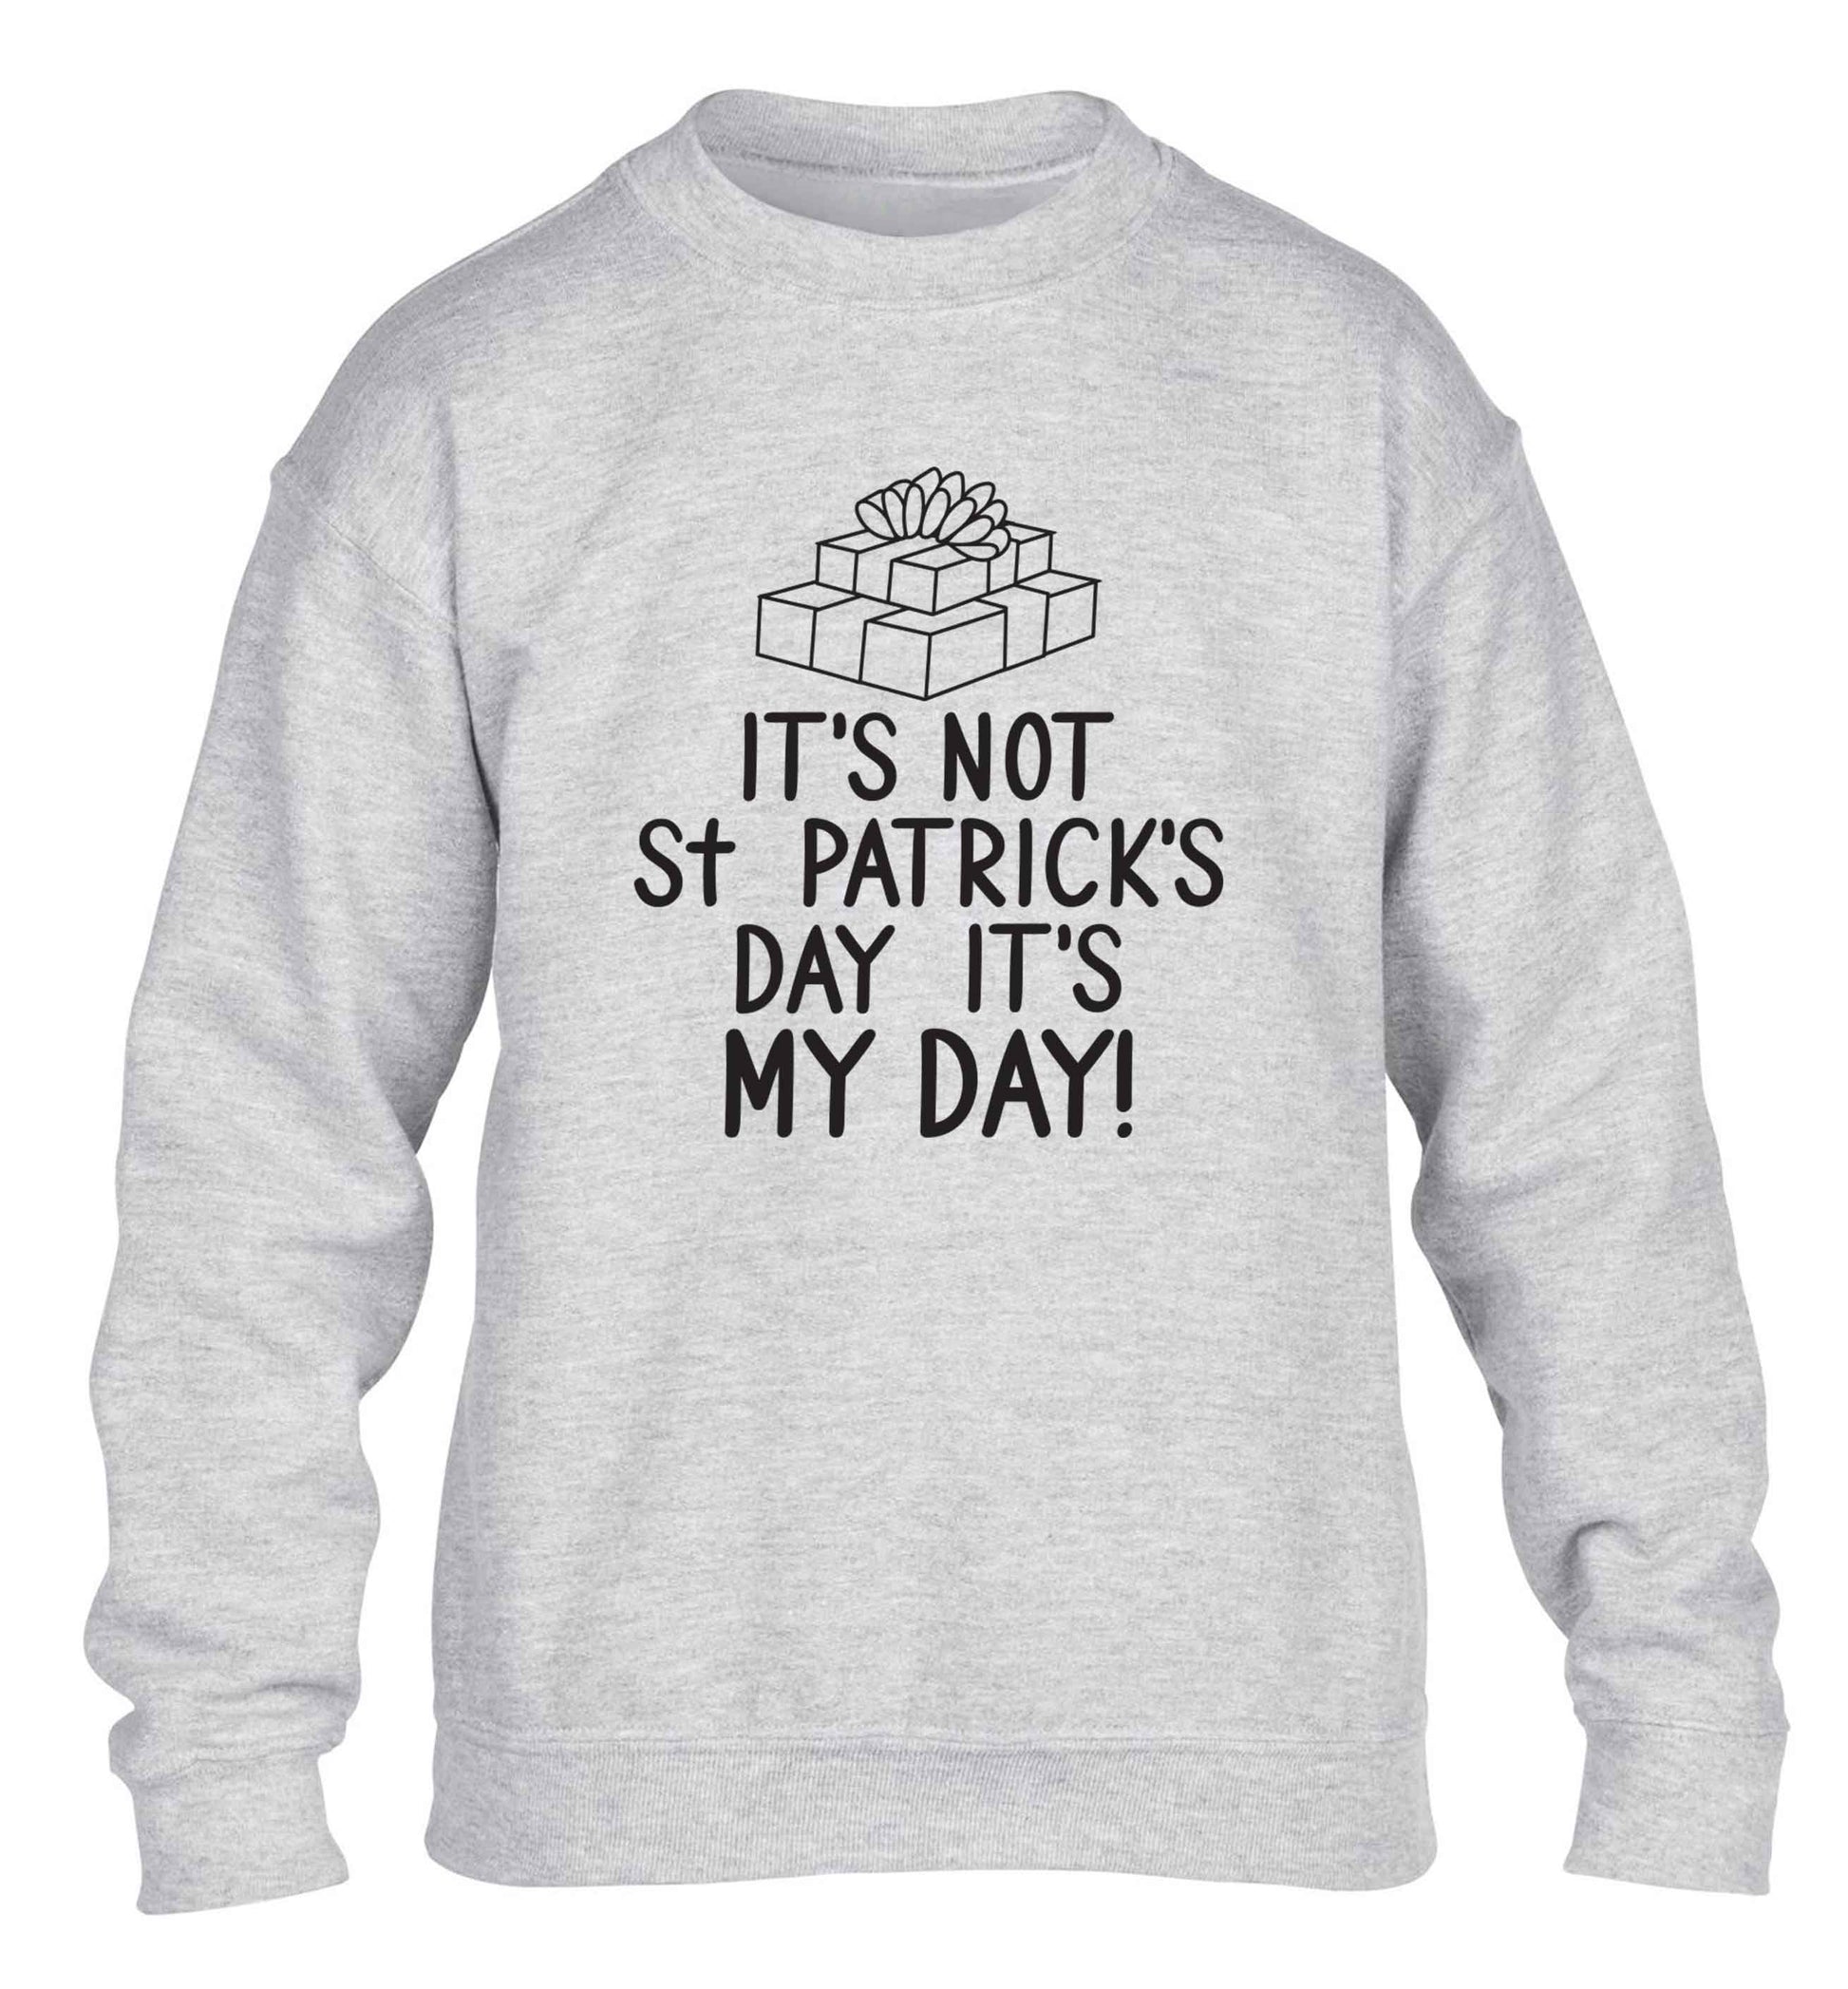 Funny gifts for your mum on mother's dayor her birthday! It's not St Patricks day it's my day children's grey sweater 12-13 Years